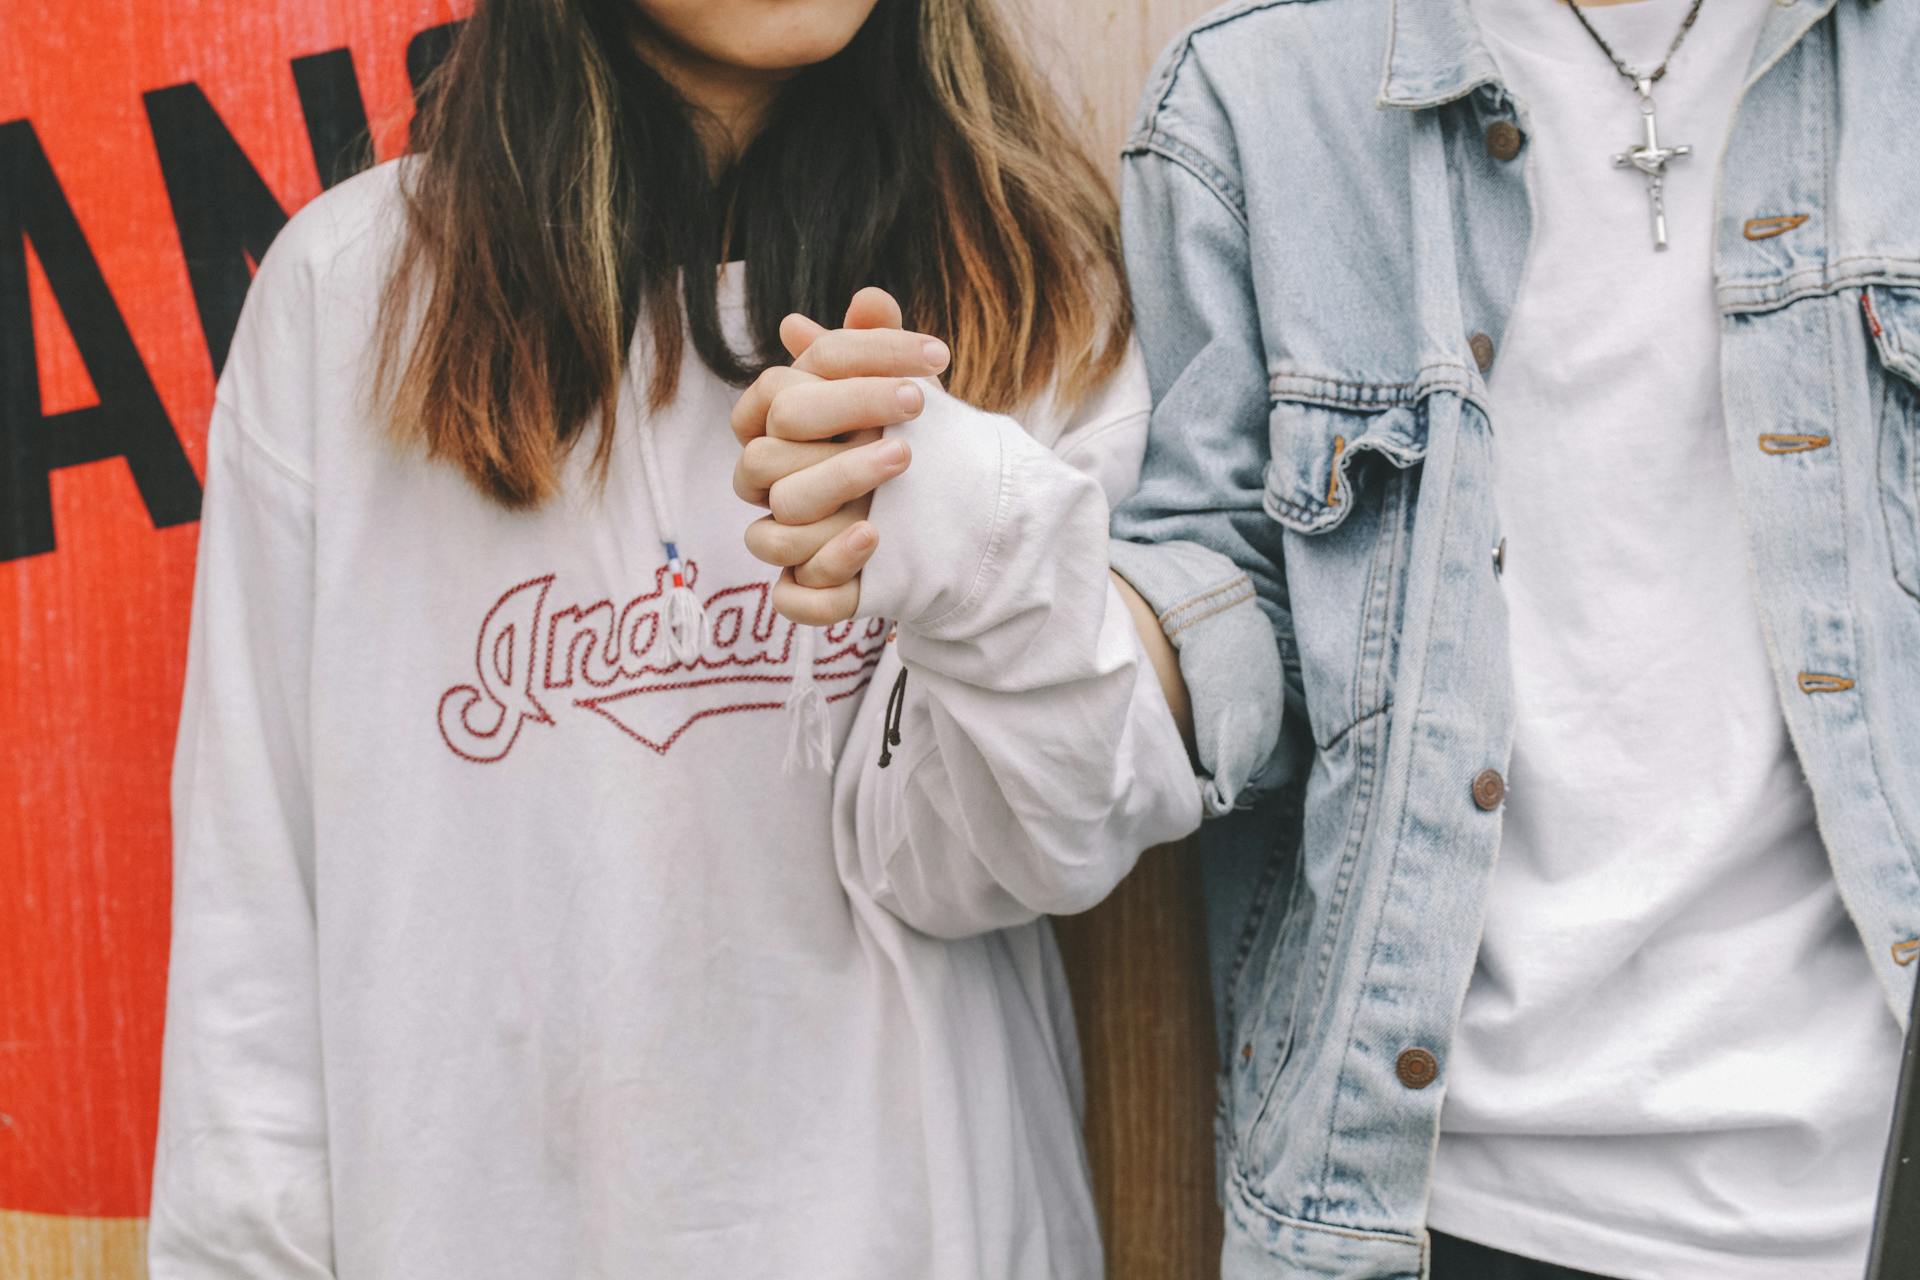 A young teenage couple | Source: Pexels